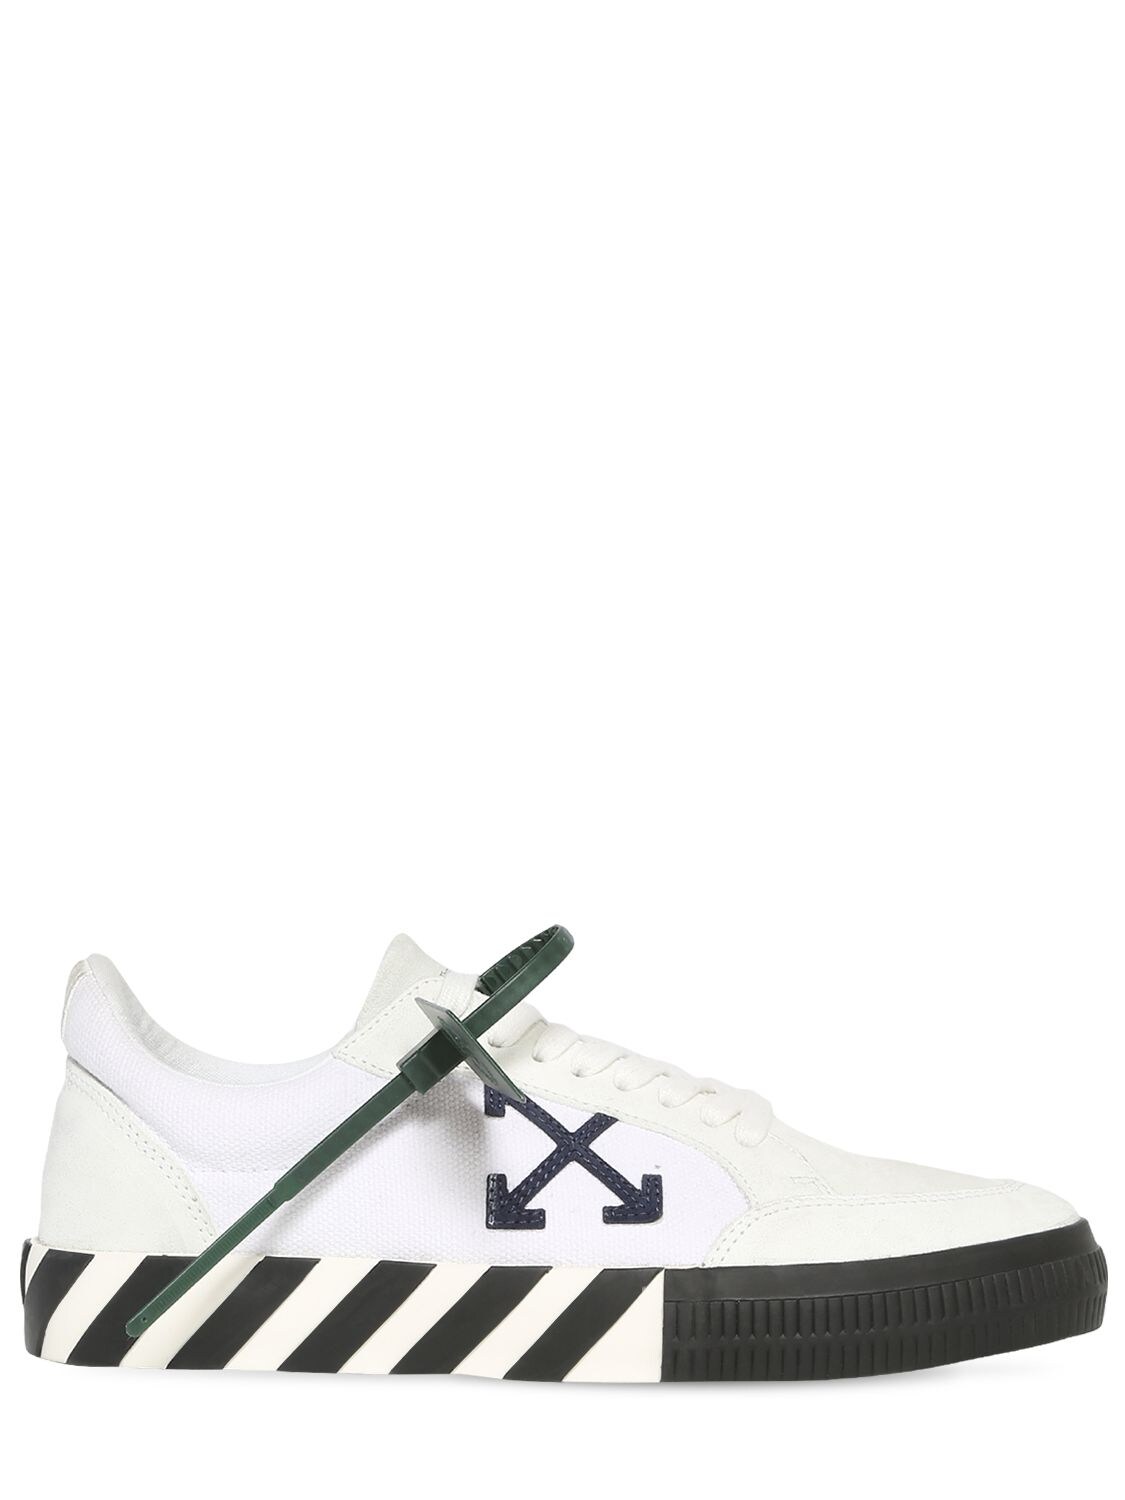 Off-white Vulcanized Canvas & Leather Sneakers In White,navy Blue ...